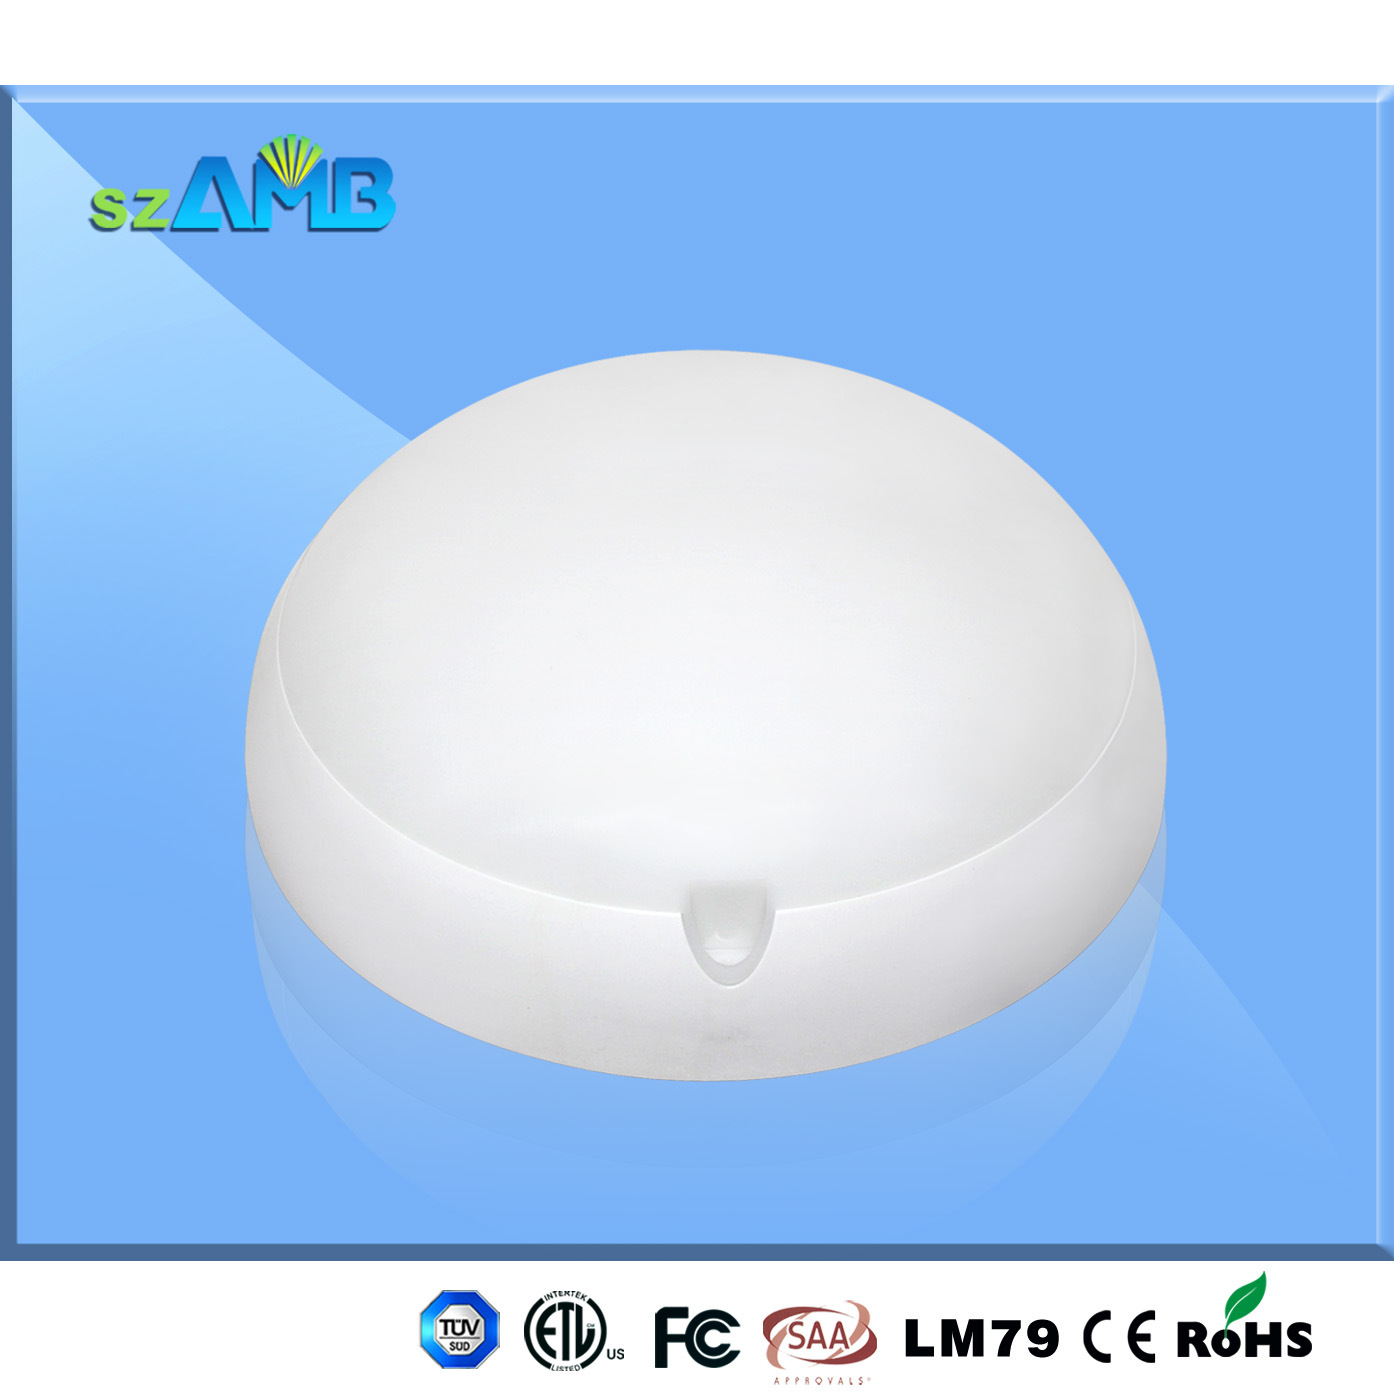 LED Ceiling Light with Sensor Dimmable Lighting System